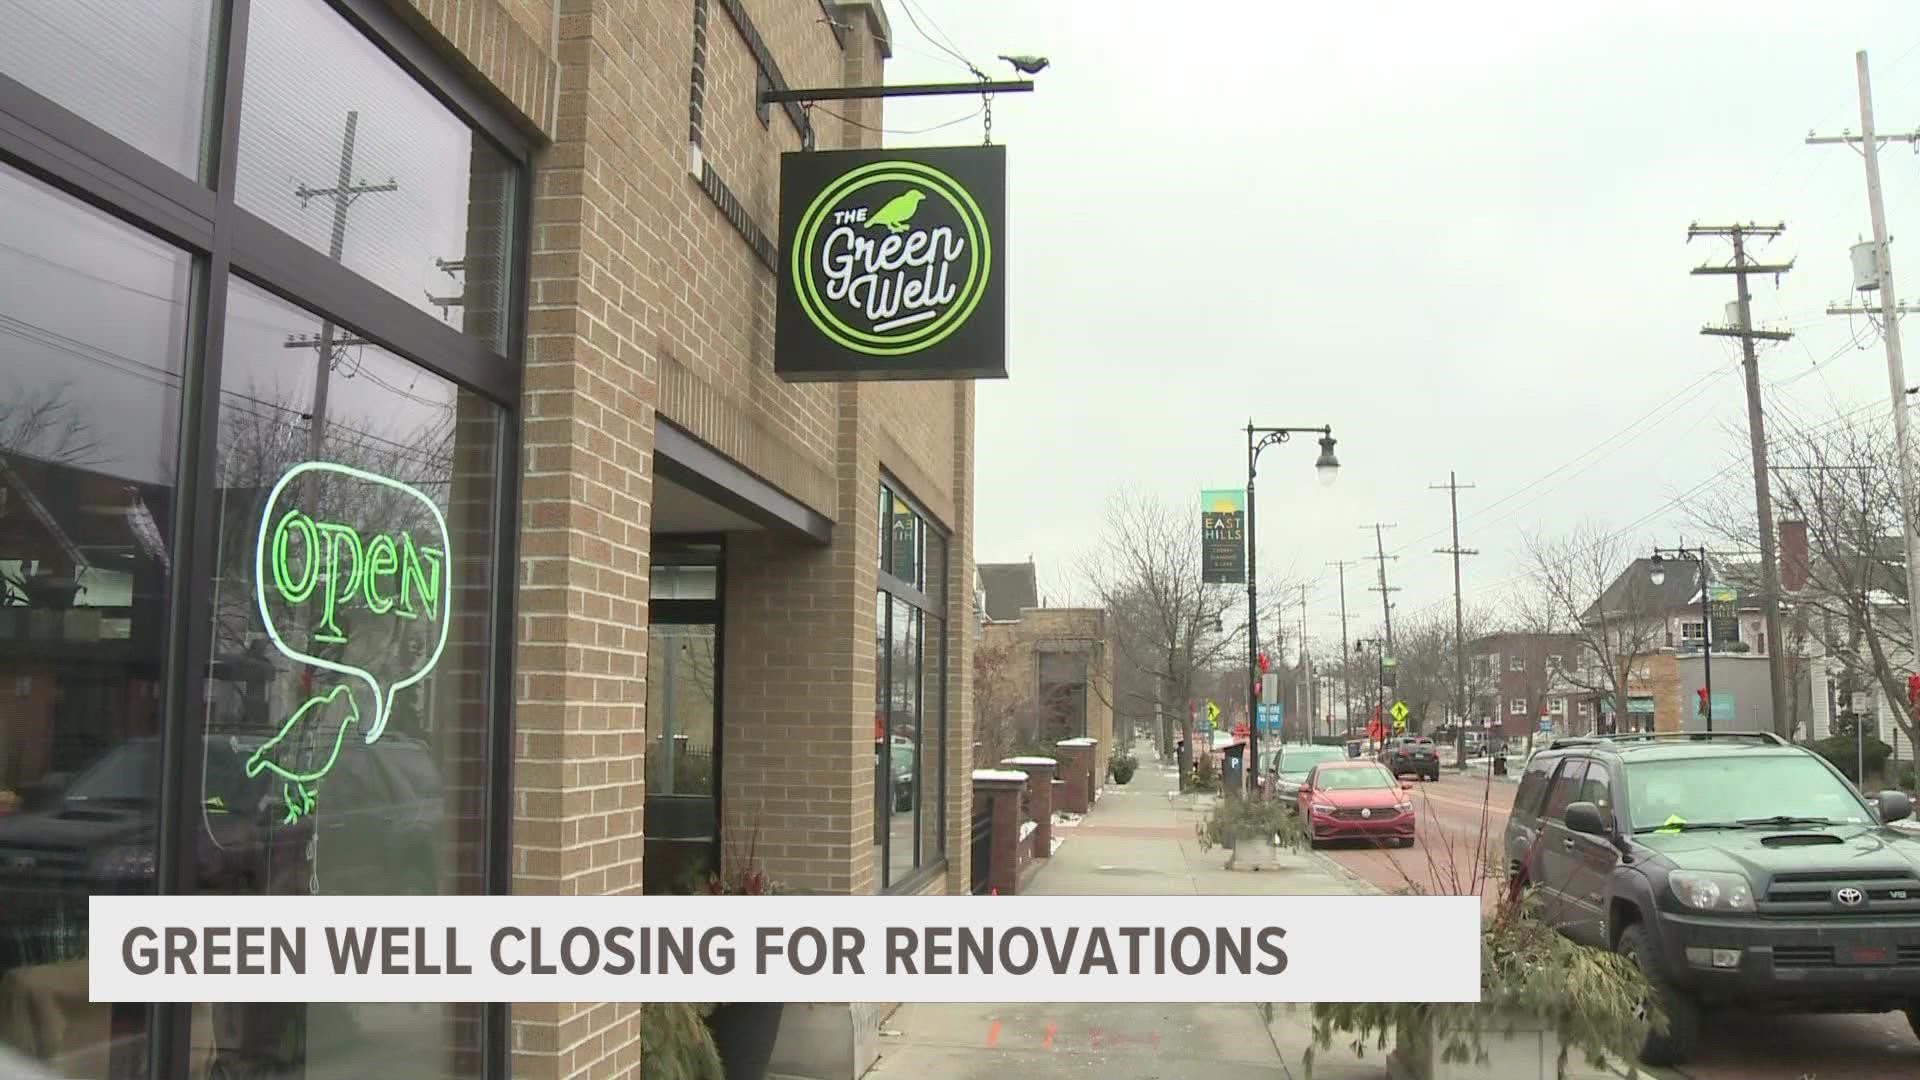 The Green Well restaurant on Cherry Street is closing on Jan. 29 for renovations, with plans to freshen up the interior with brighter colors and an open concept.